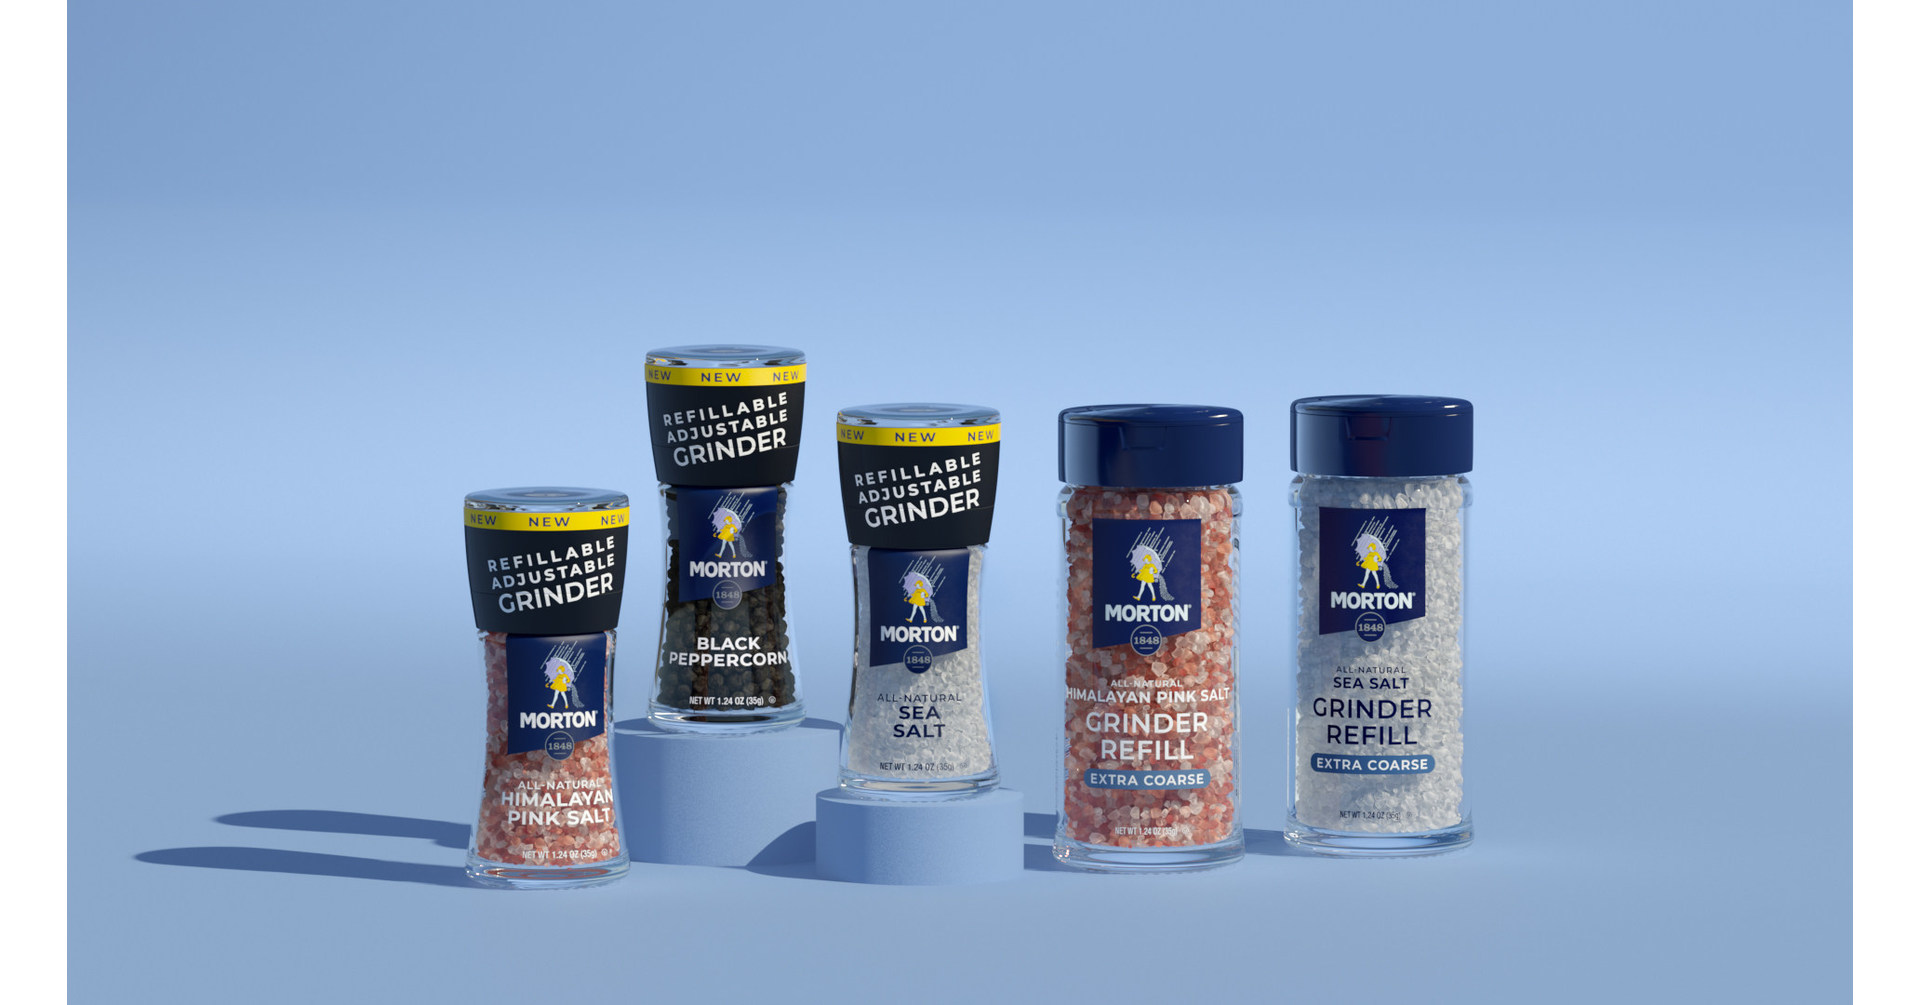 Morton, the iconic salt brand, is launching an alternative to